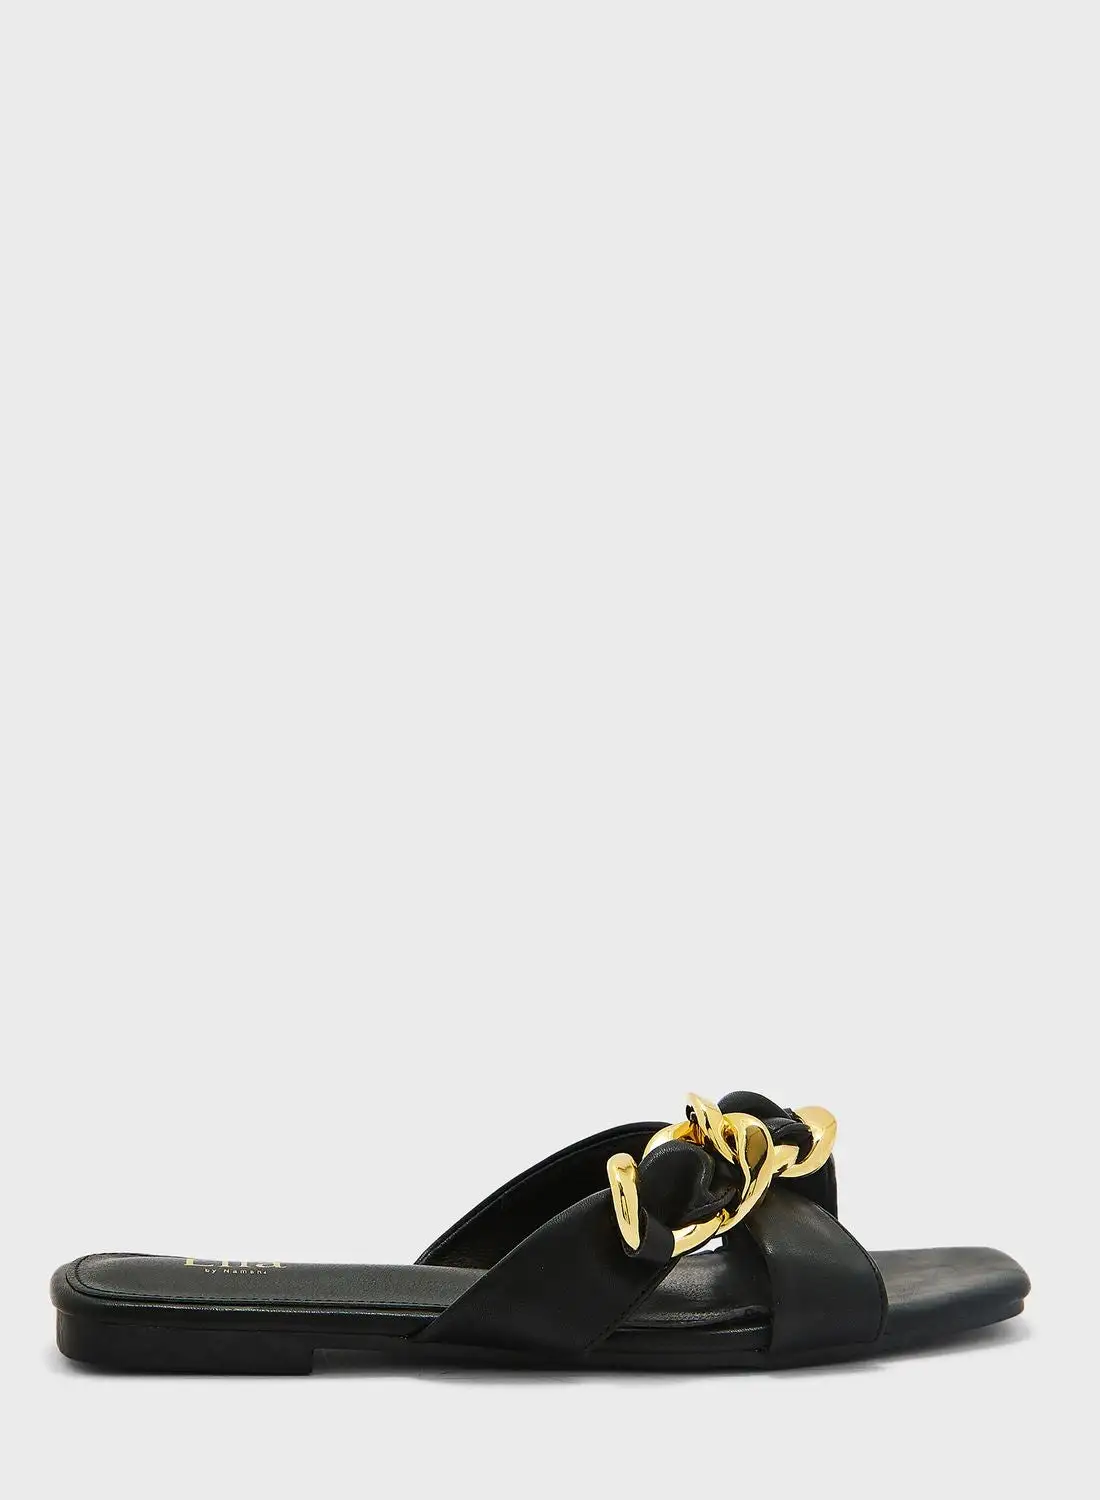 ELLA Crossover With A Chain Flat Sandals